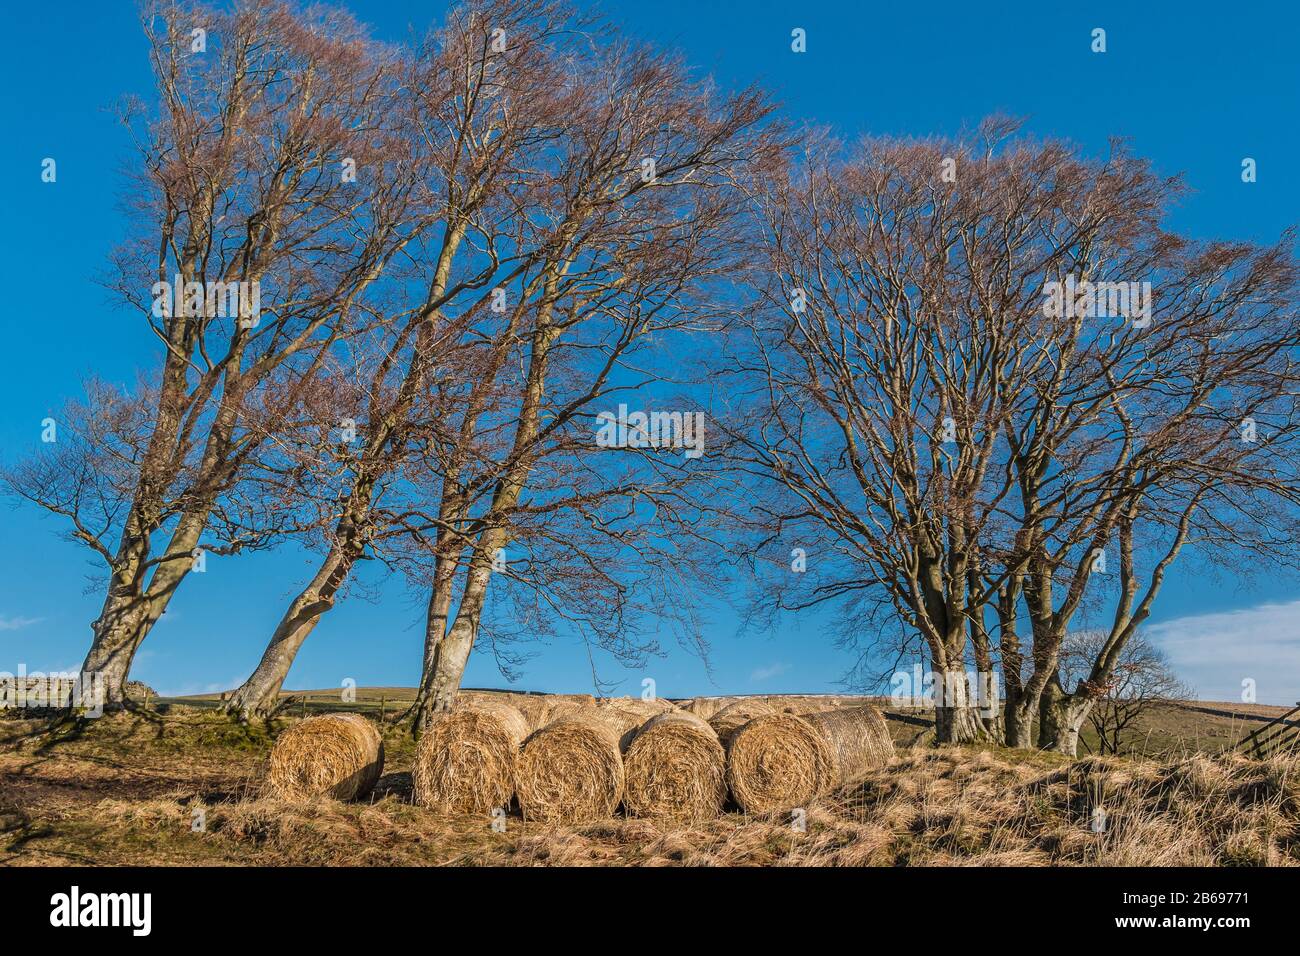 Fresh bales of straw bedding underneath a group of mature bare beech trees under a cloudless blue sky. Stock Photo